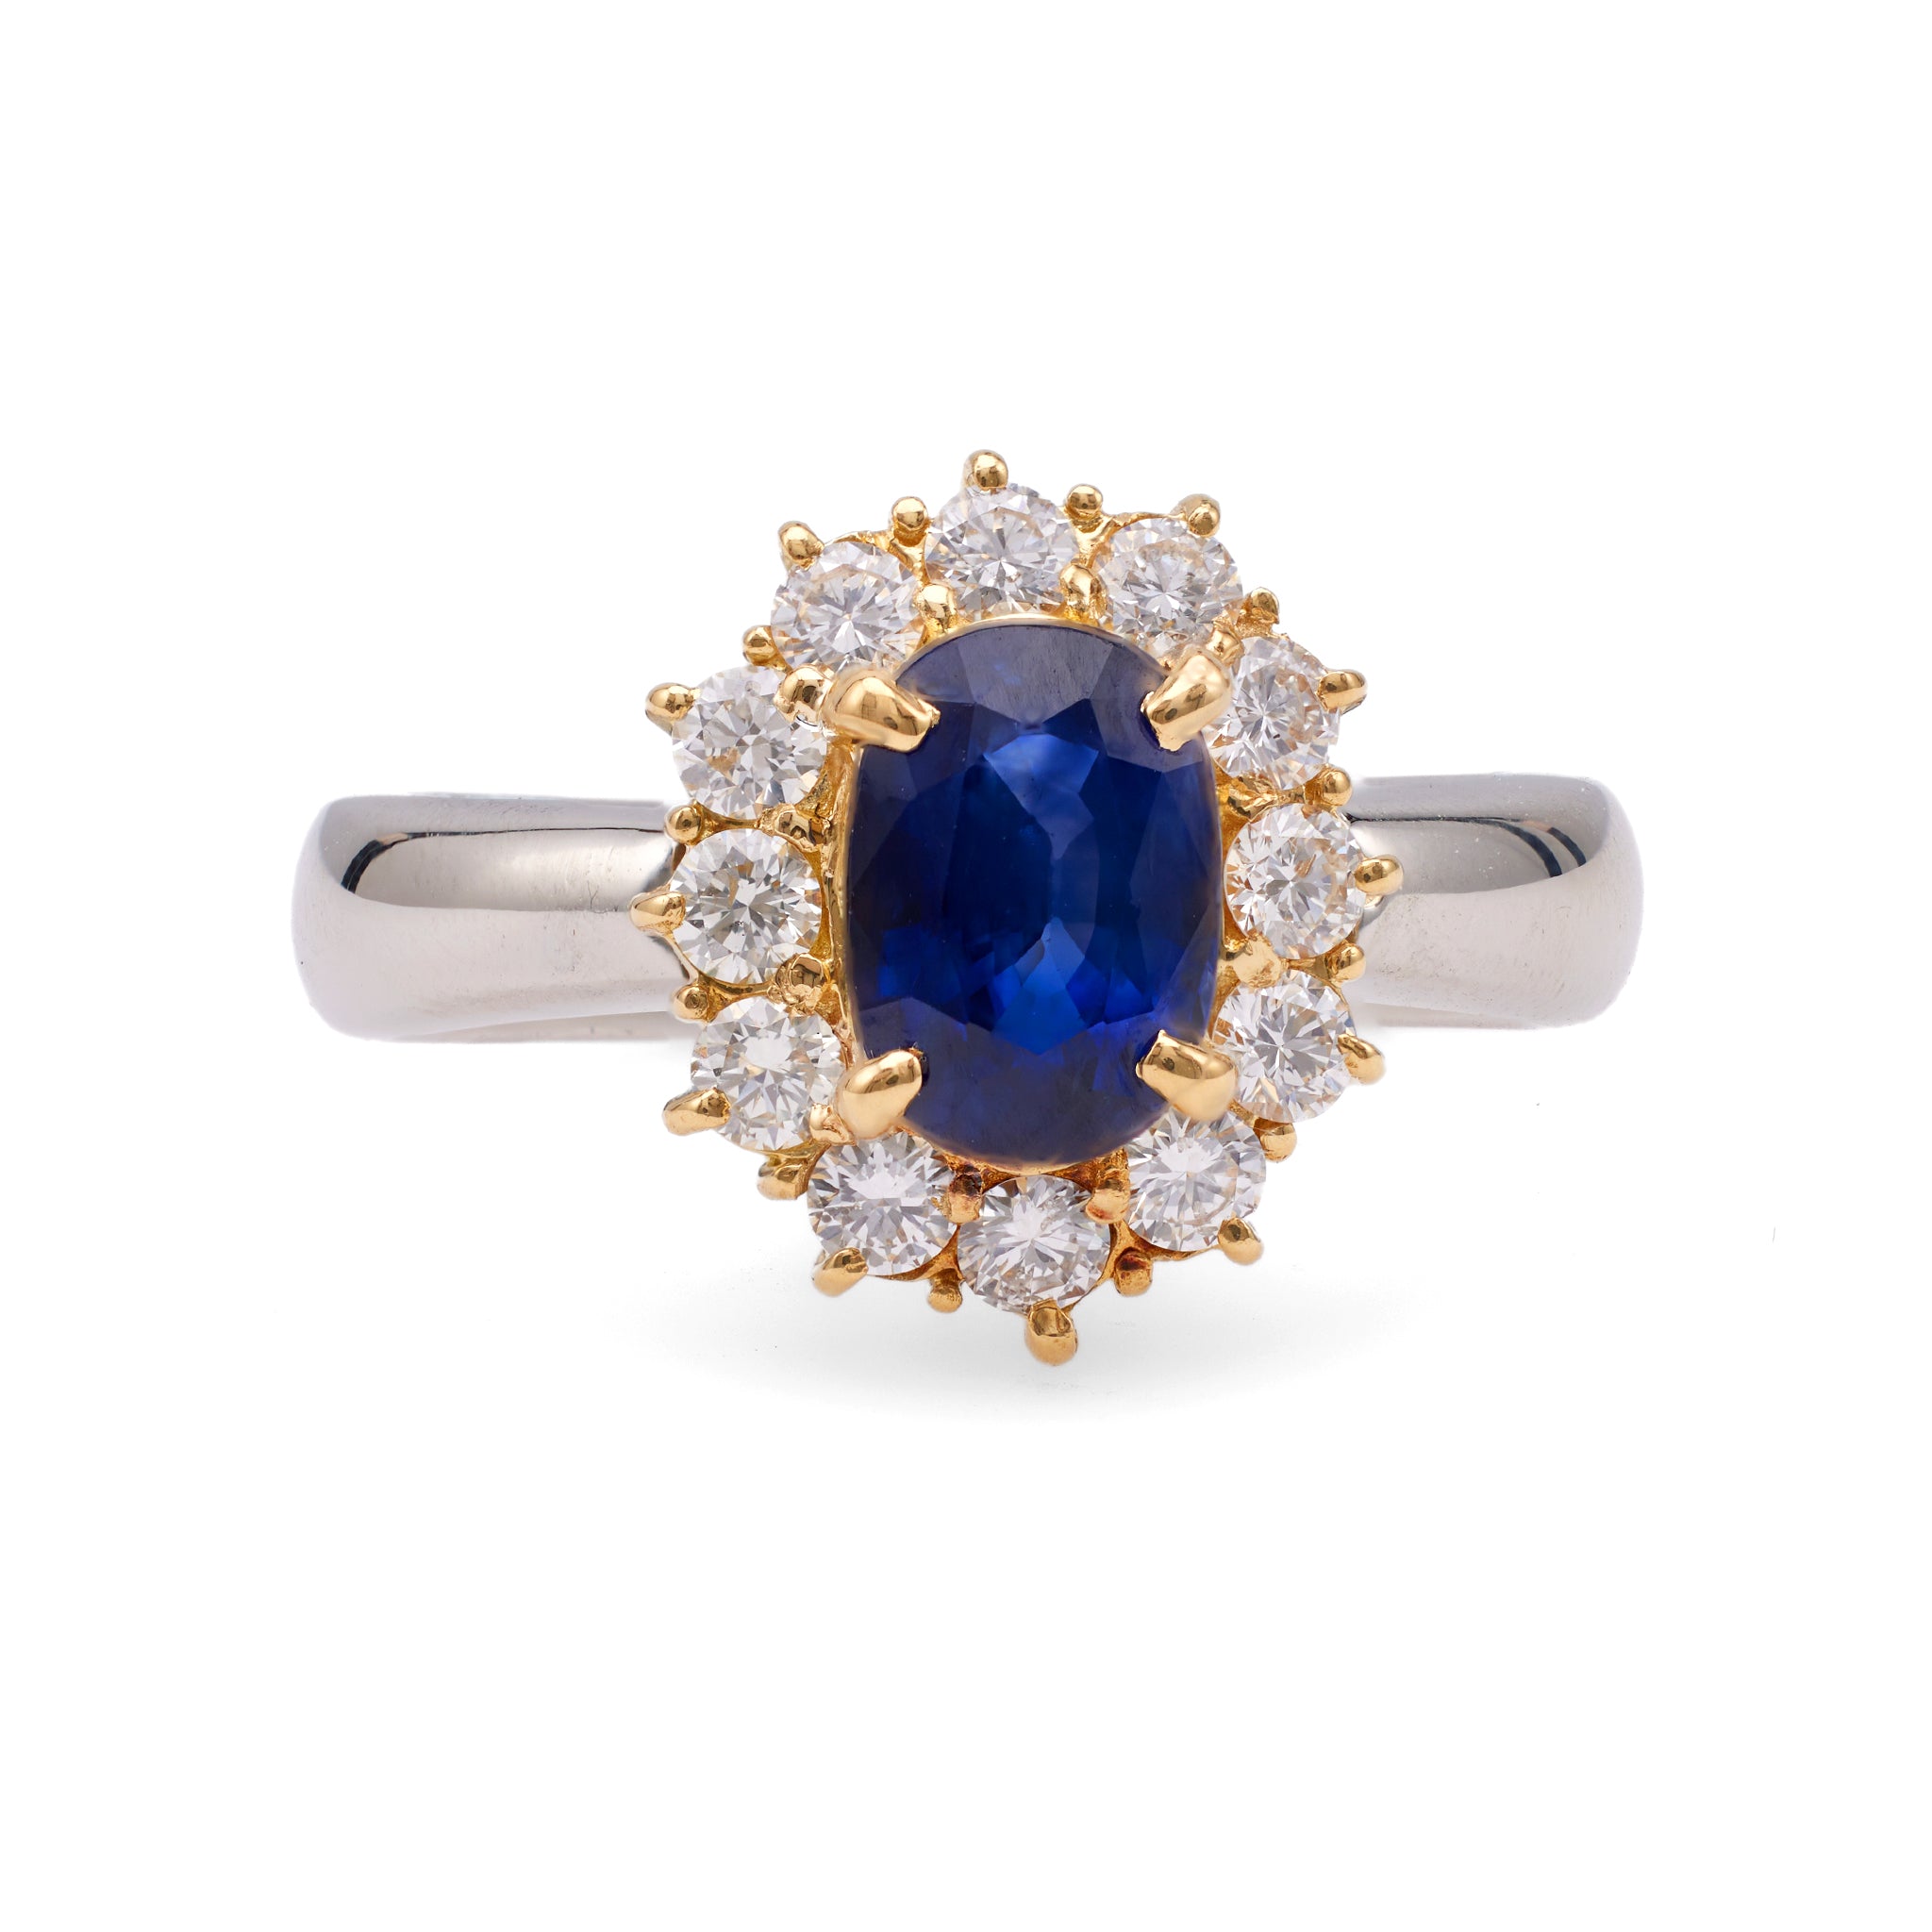 Vintage Sapphire Diamond Platinum 18k Yellow Gold Cluster Ring Rings Jack Weir & Sons   